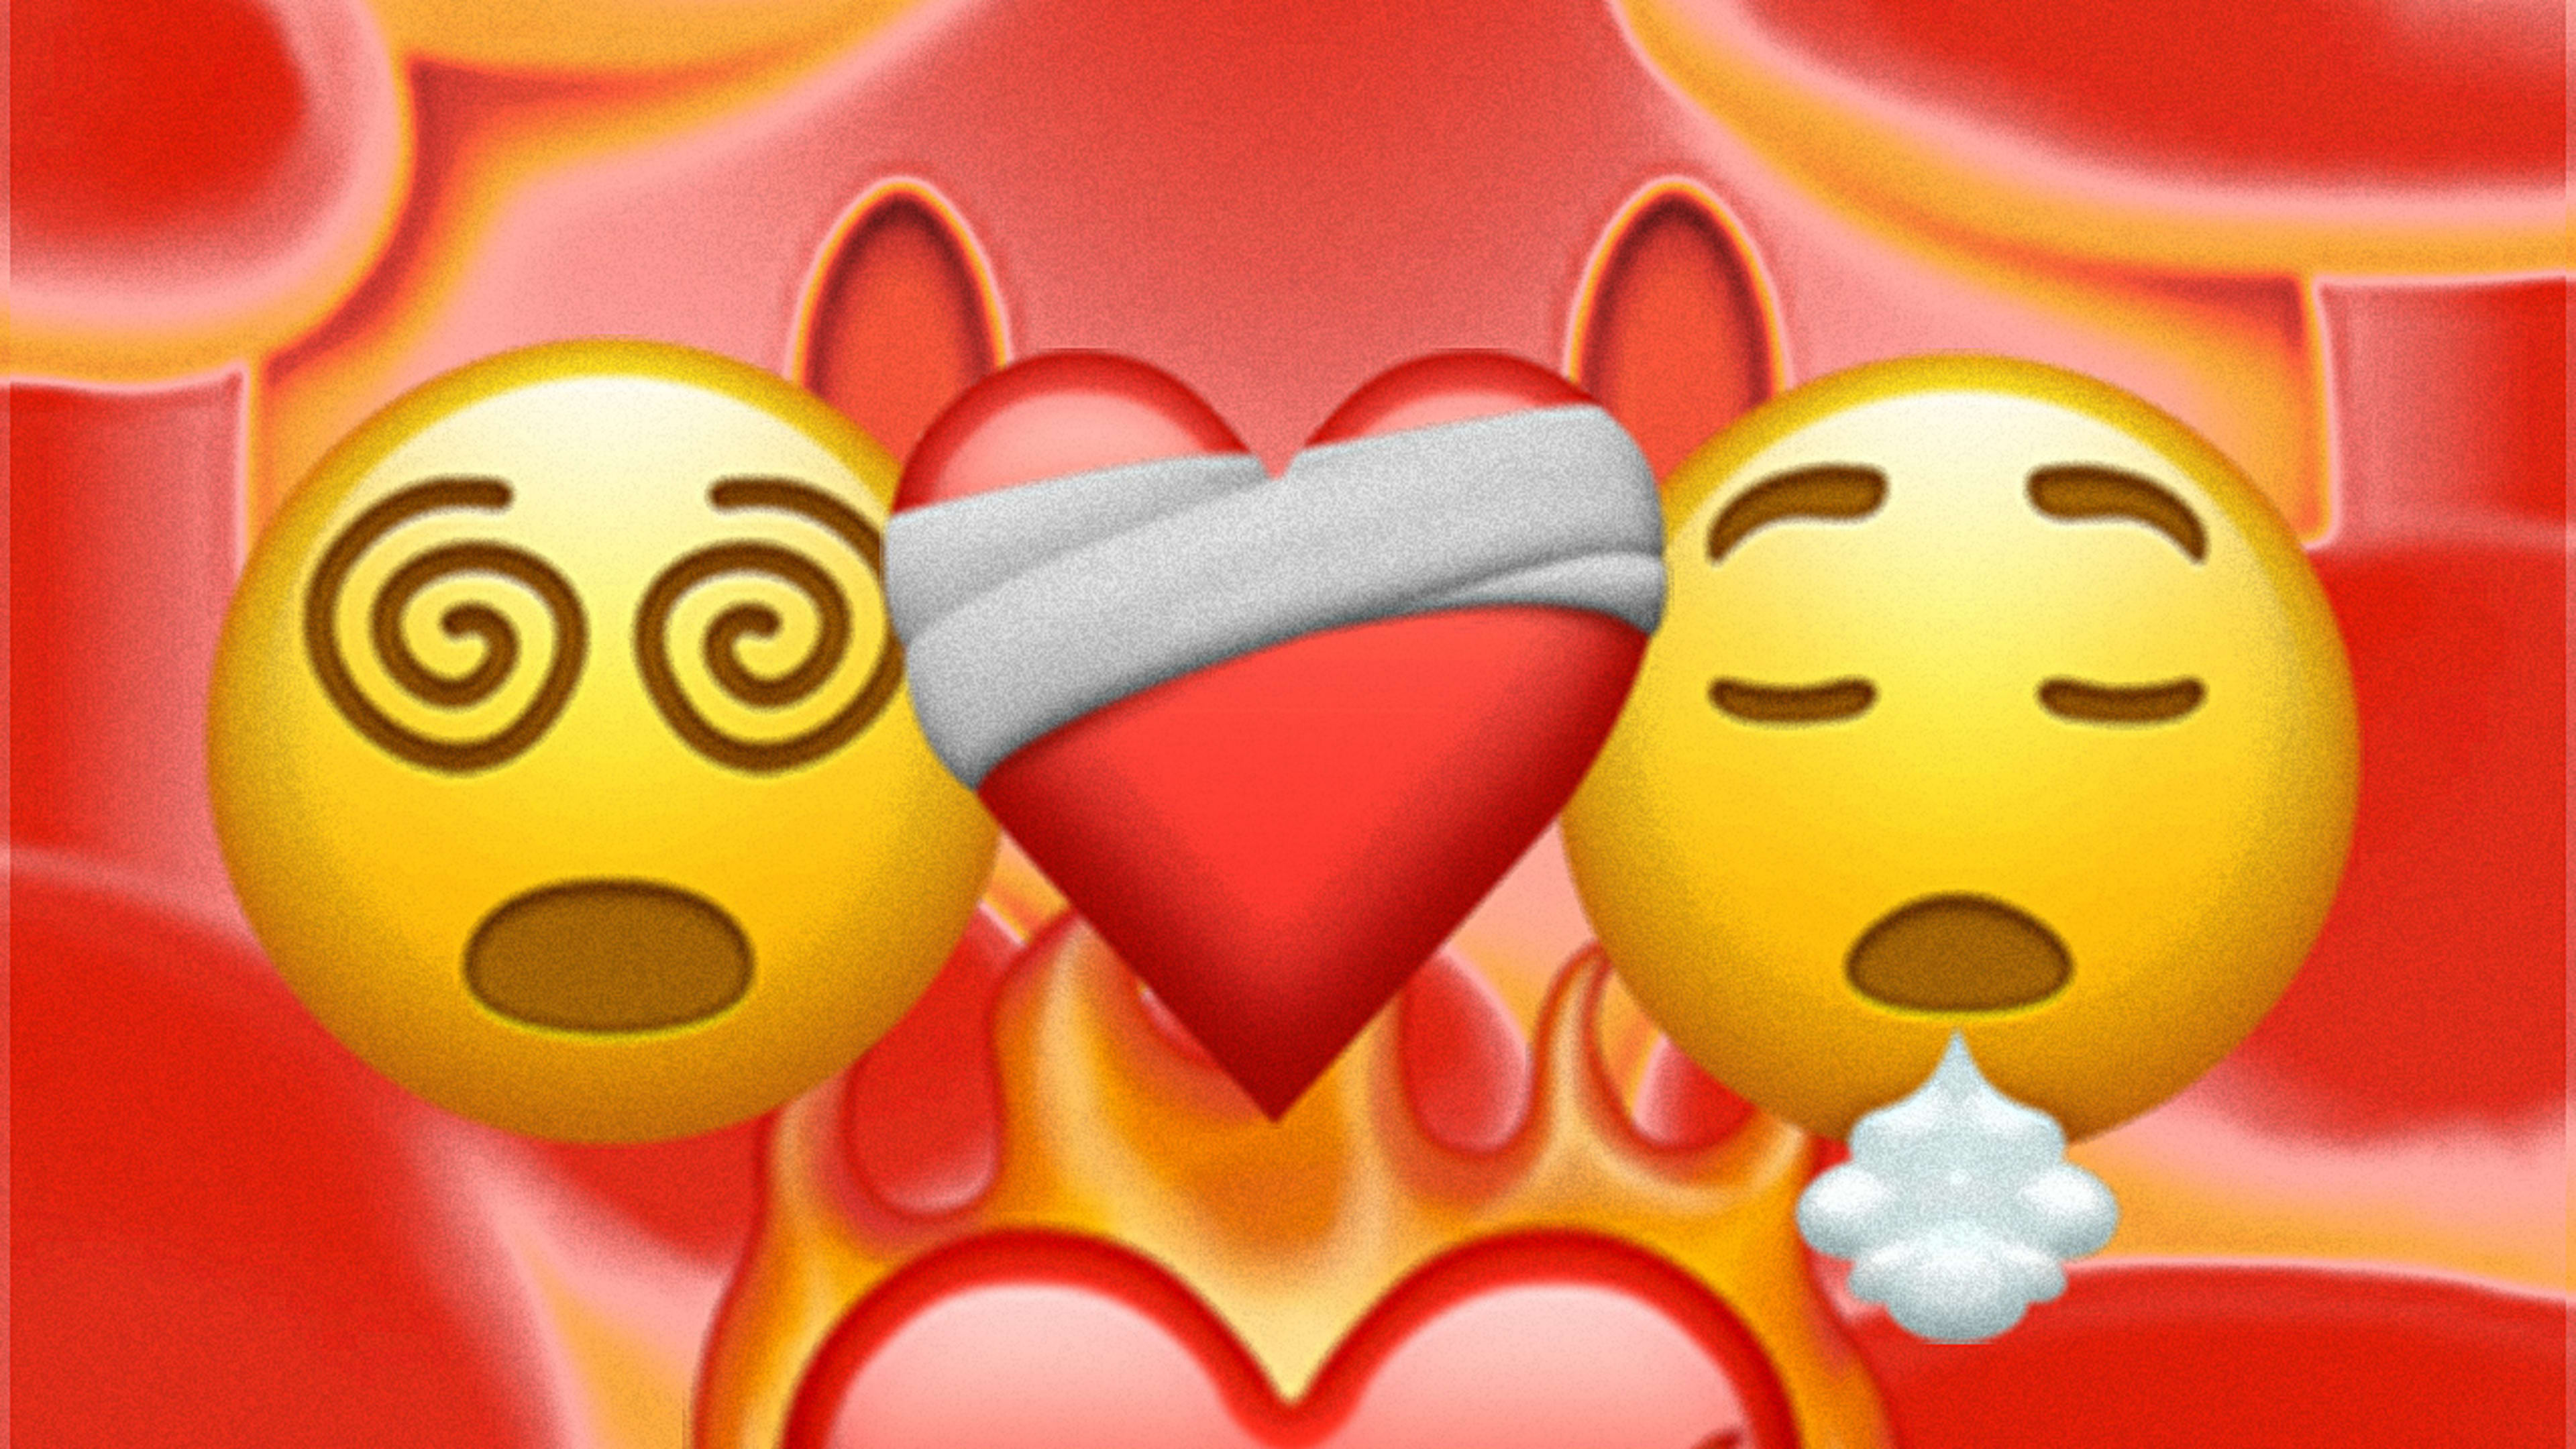 These new emojis perfectly sum up this dumpster fire of a year